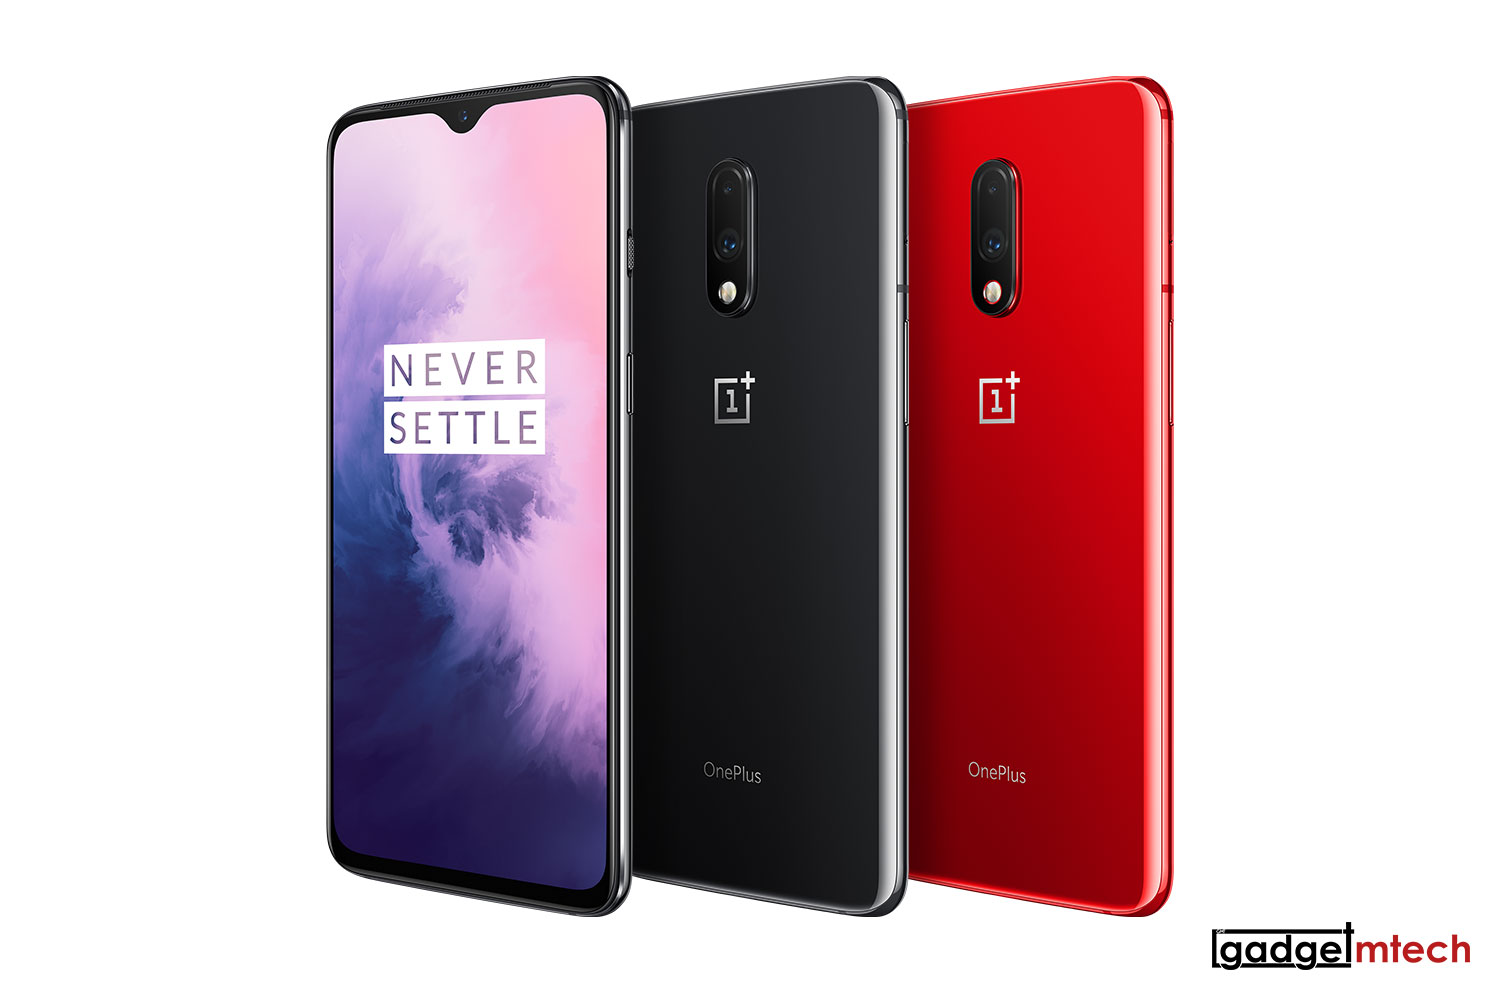 You Can Now Pre-Order the OnePlus 7 for RM2,199